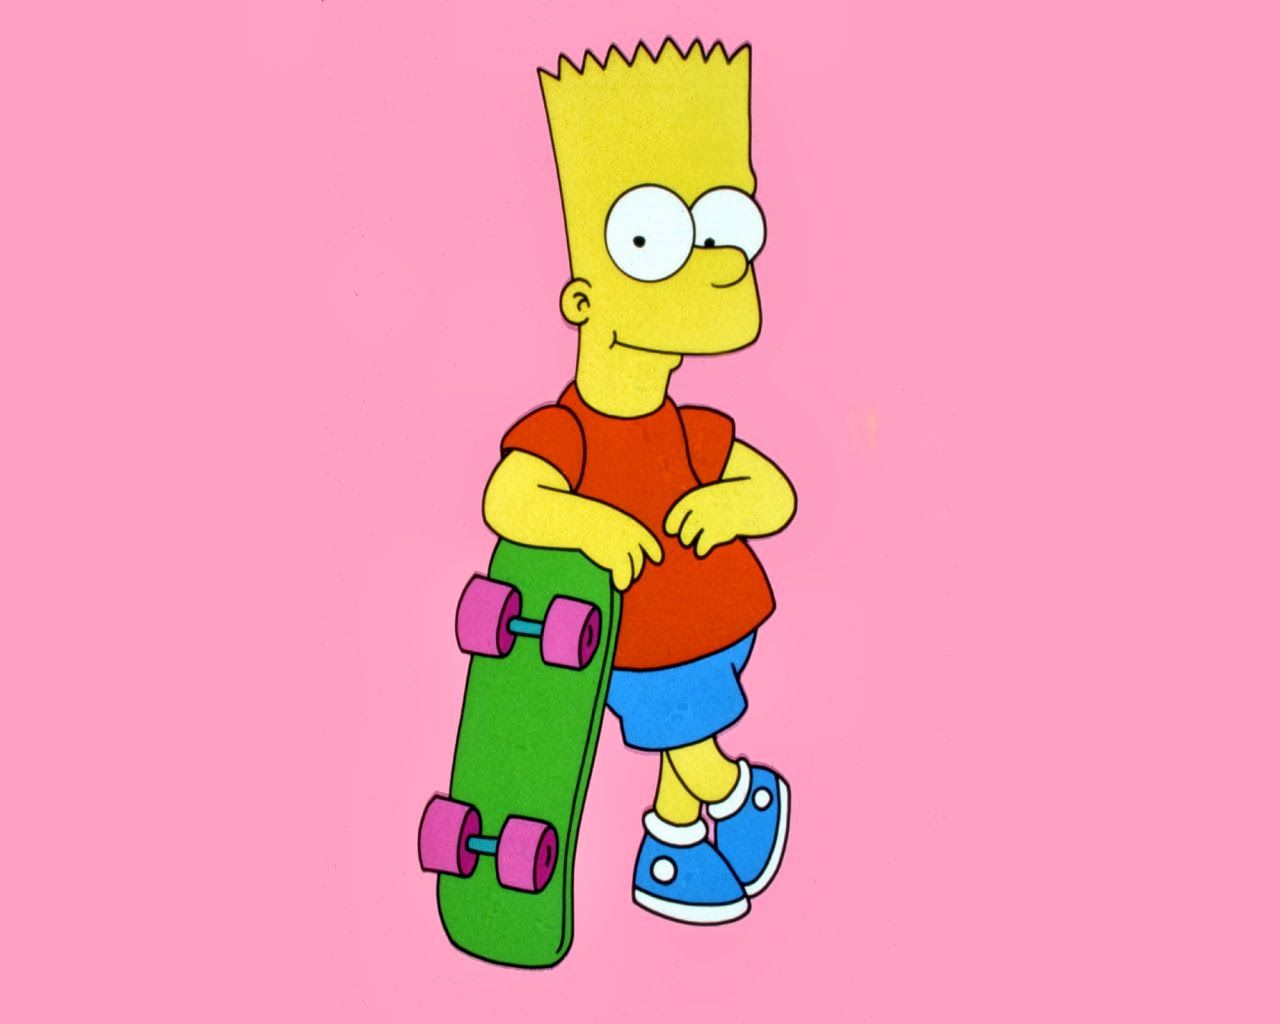 Simpsons Pink Wallpapers